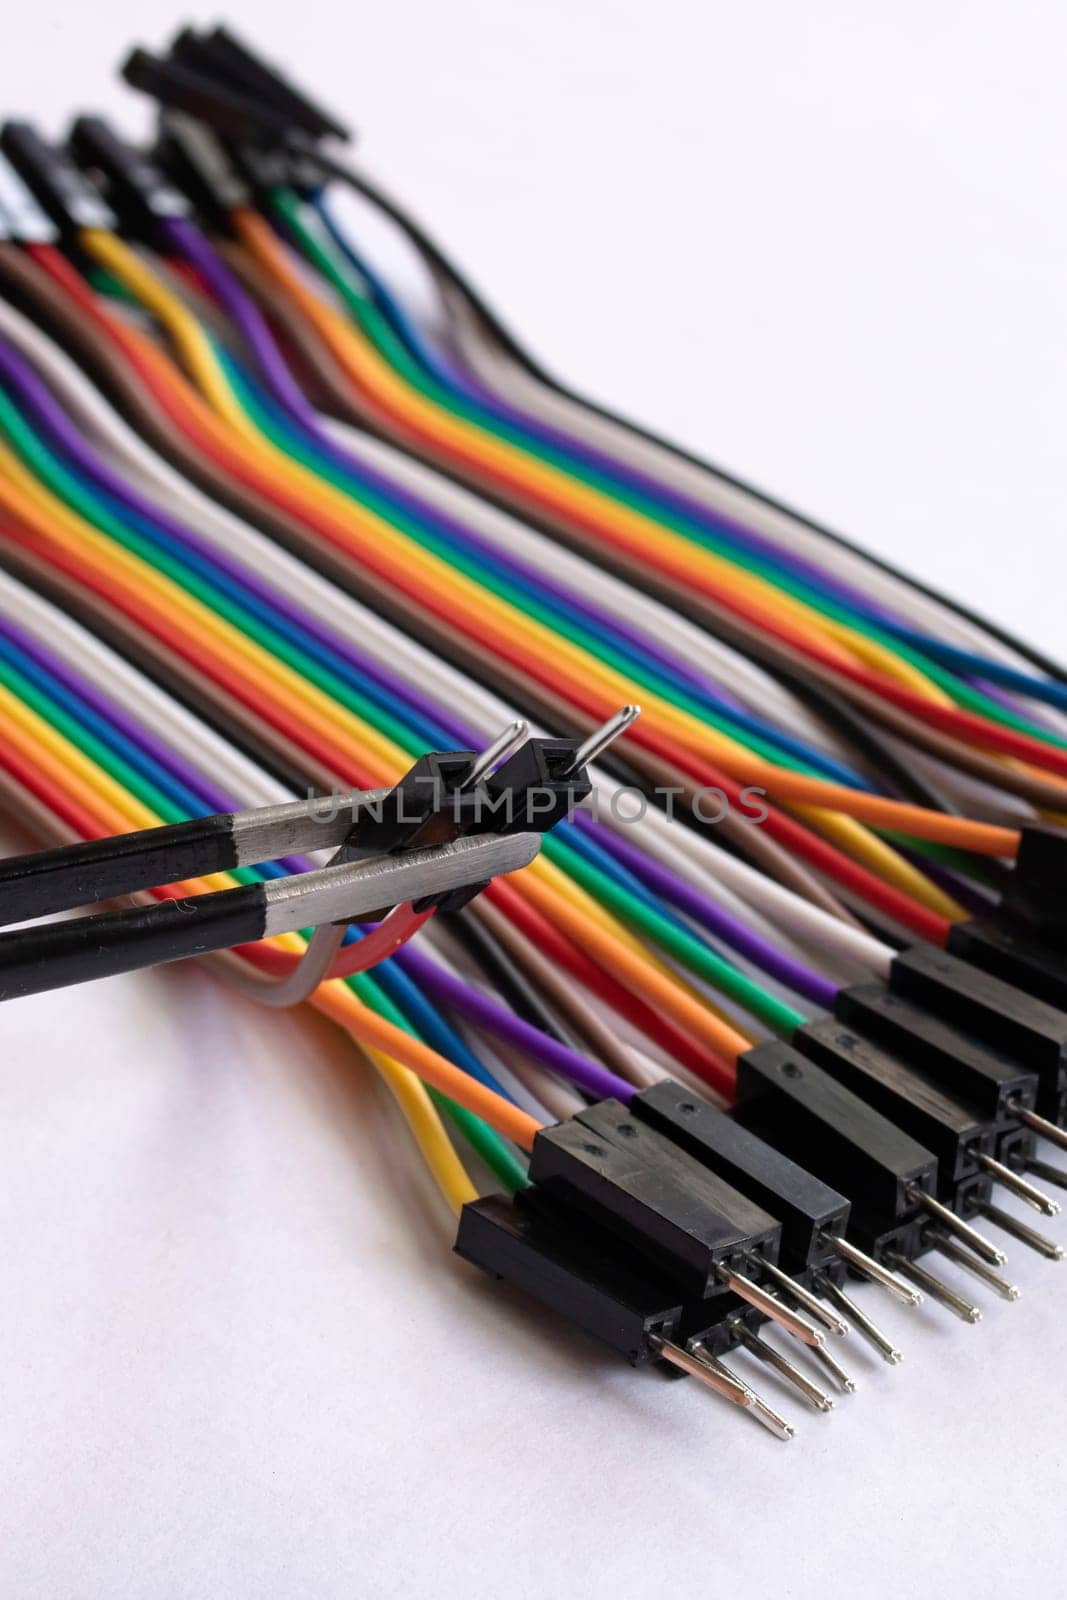 Multicolored computer wires and tweezers on a white background by Vera1703